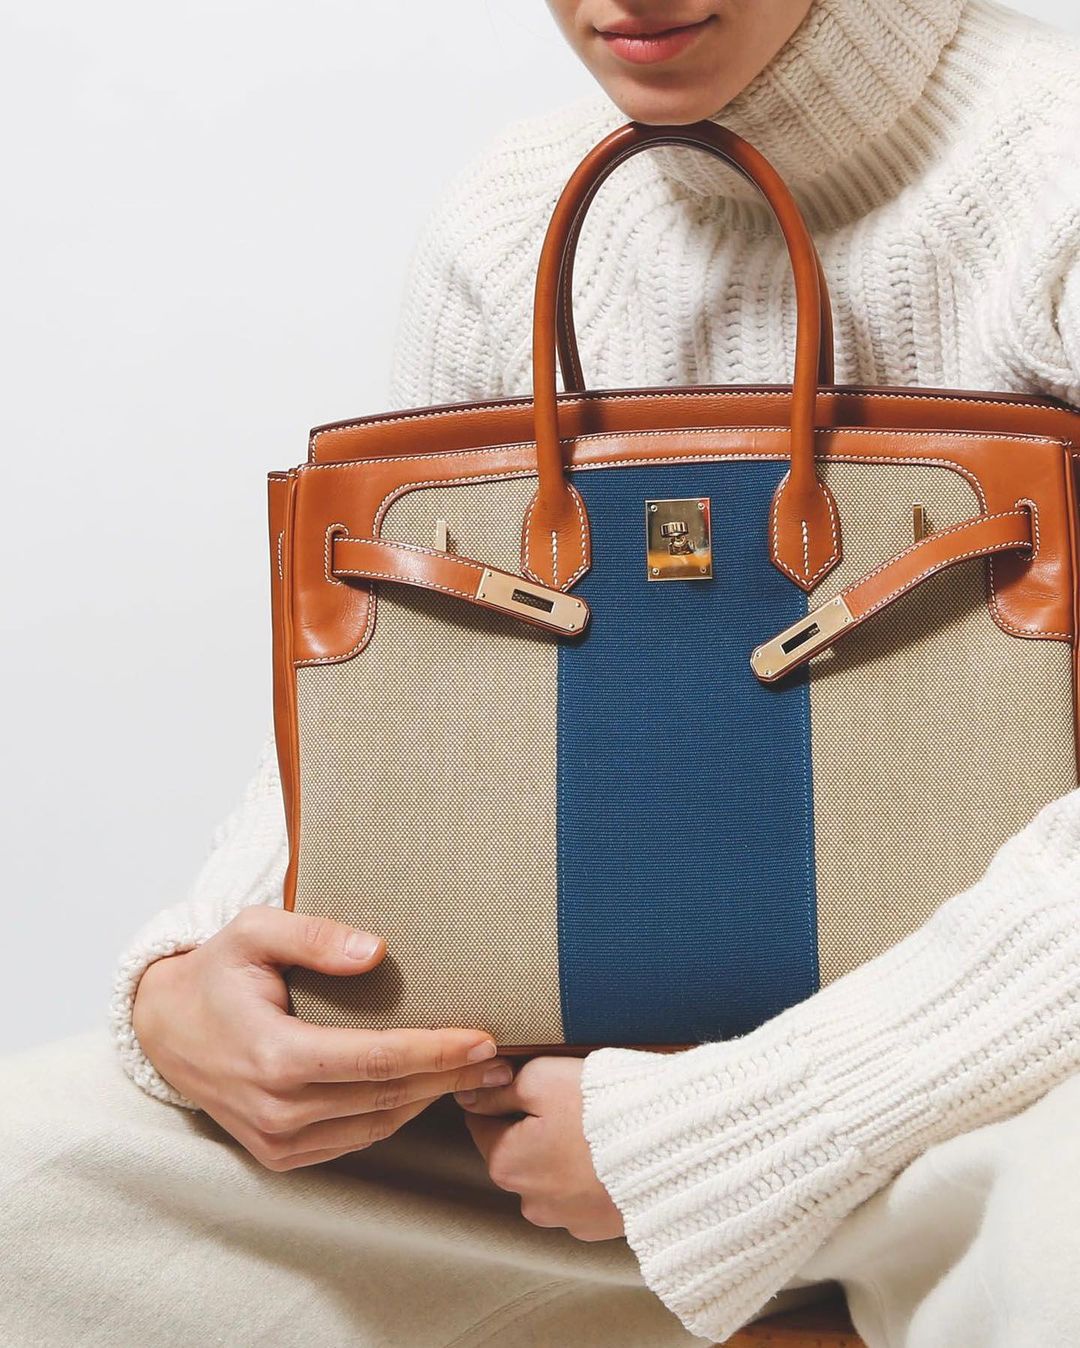 How a Handbag Becomes the Crown Jewel of Your Wardrobe